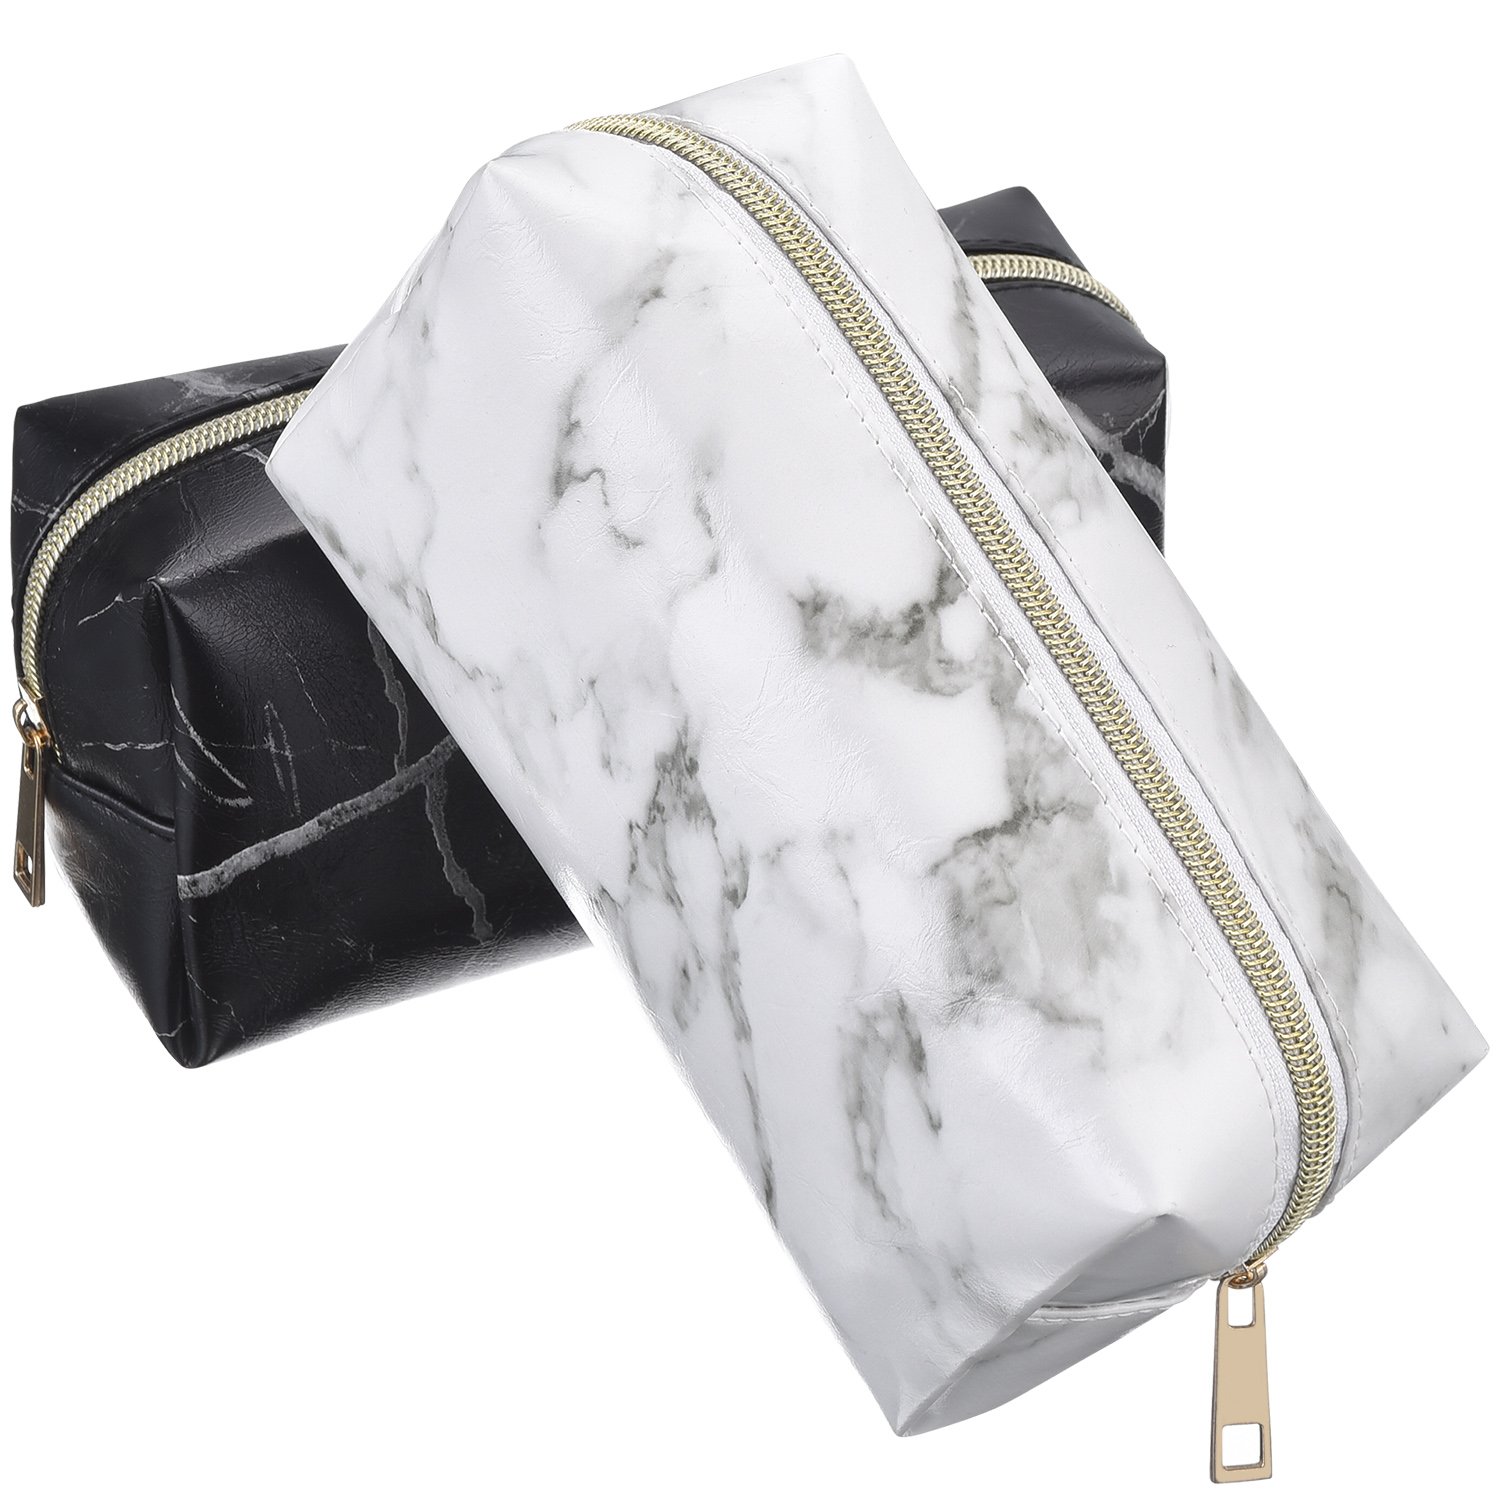 Frienda 2 Pieces Cosmetic Toiletry Makeup Bag Pouch Gold Zipper Storage Bag Marble Pattern Portable Makeup Brushes Bag (S, White and Black)